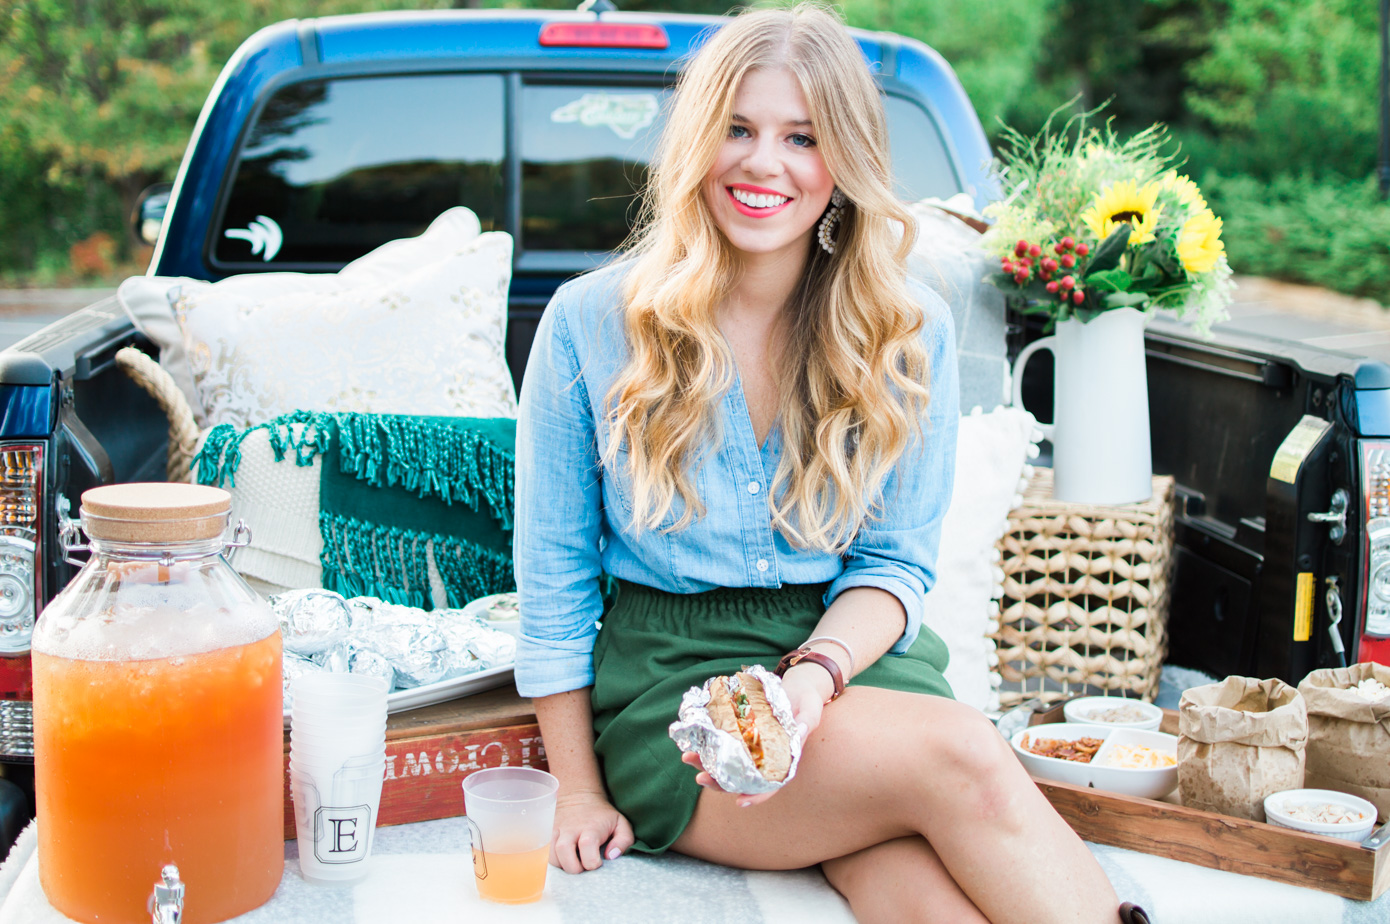 How to Throw a Tailgate Party | Cozy Chic Tailgate | Louella Reese Life & Style Blog 